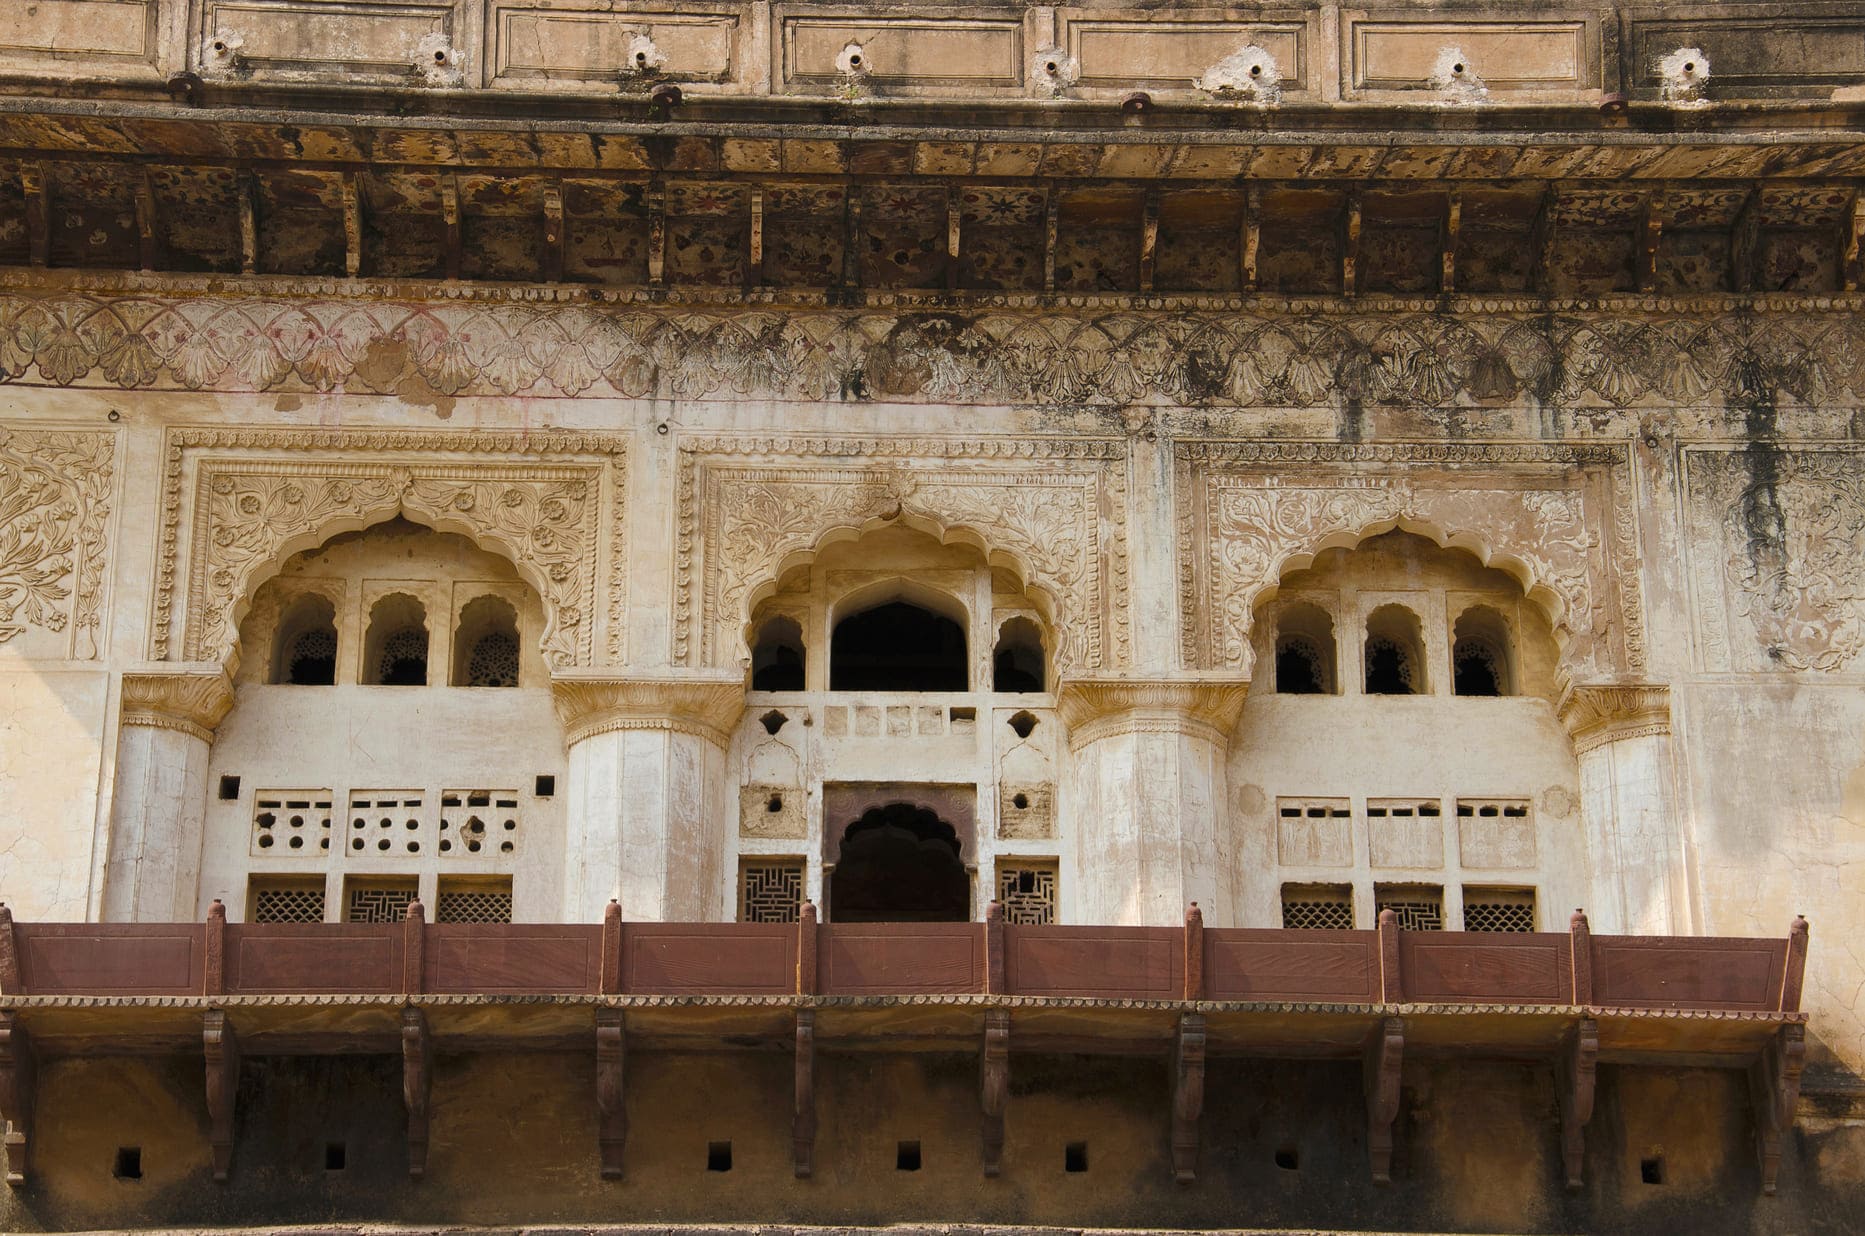 Finely carved windows and balconies in Raj Mahal. Jaali screens and arched galleries allow enough fresh air and a cool breeze to enter the building, Orchha